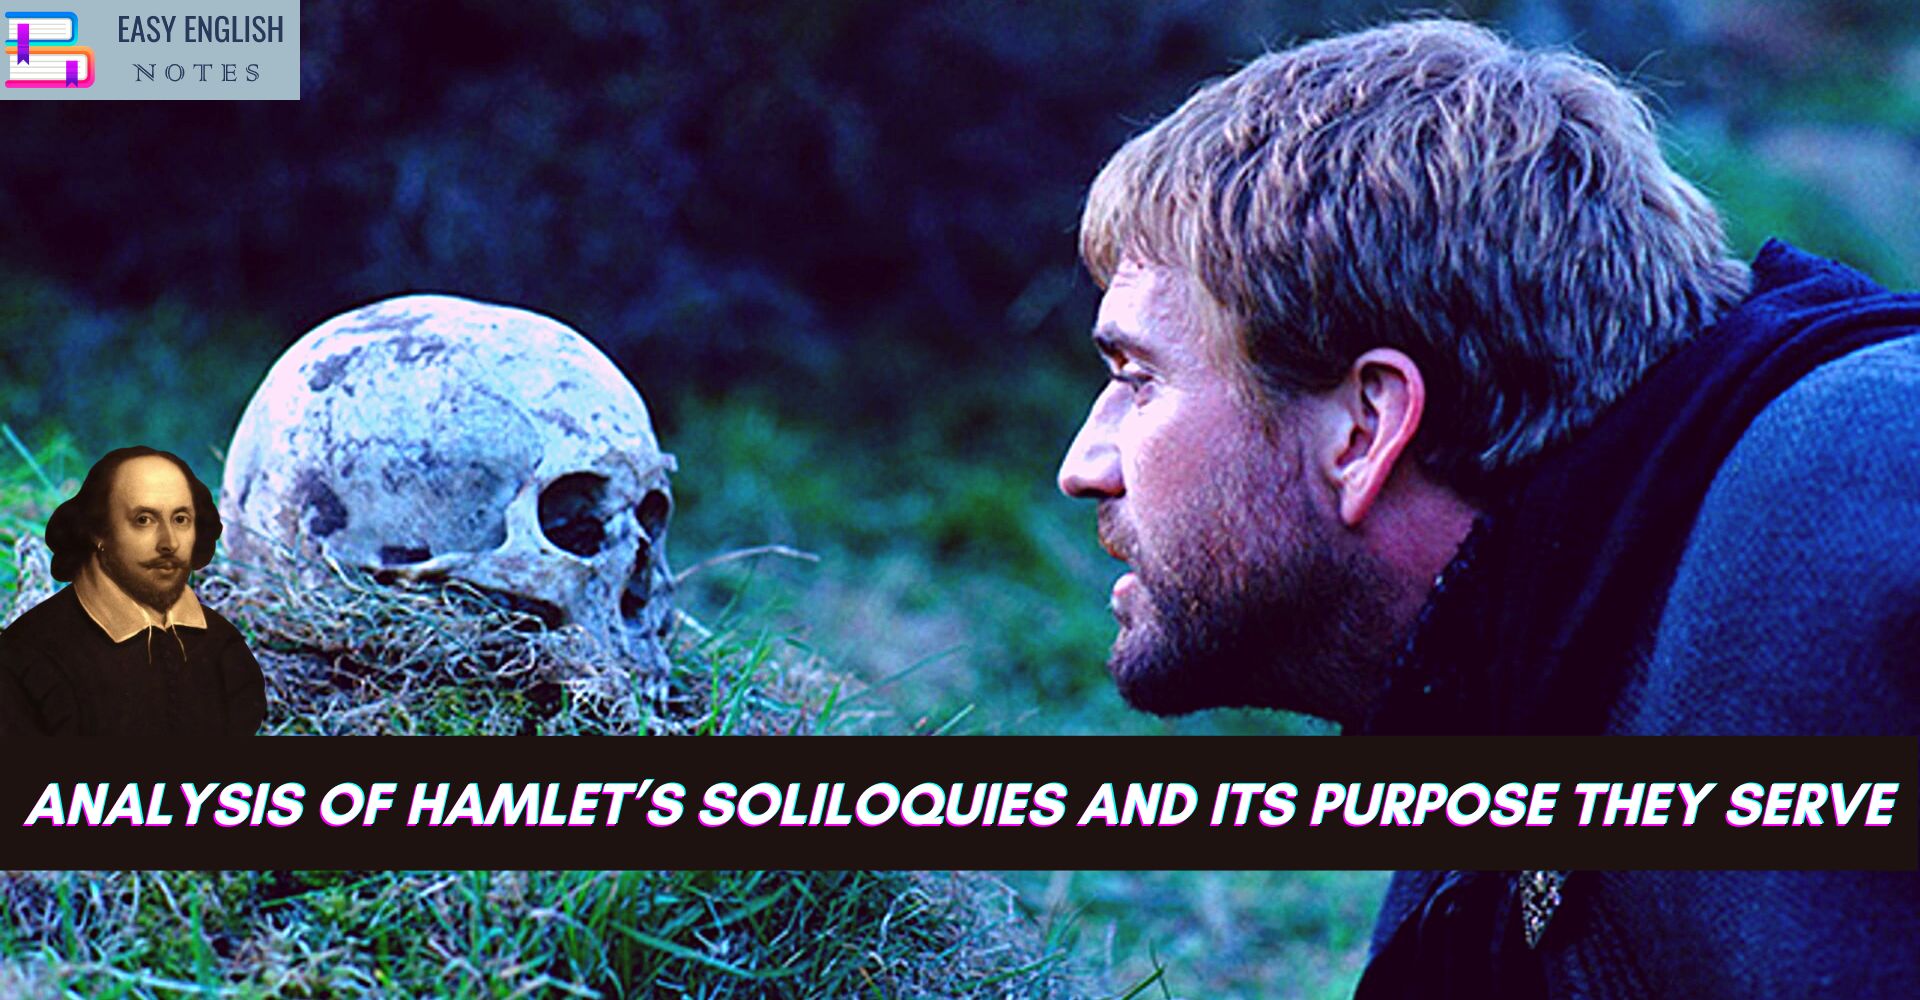 Analysis of Hamlet’s soliloquies and its purpose they serve